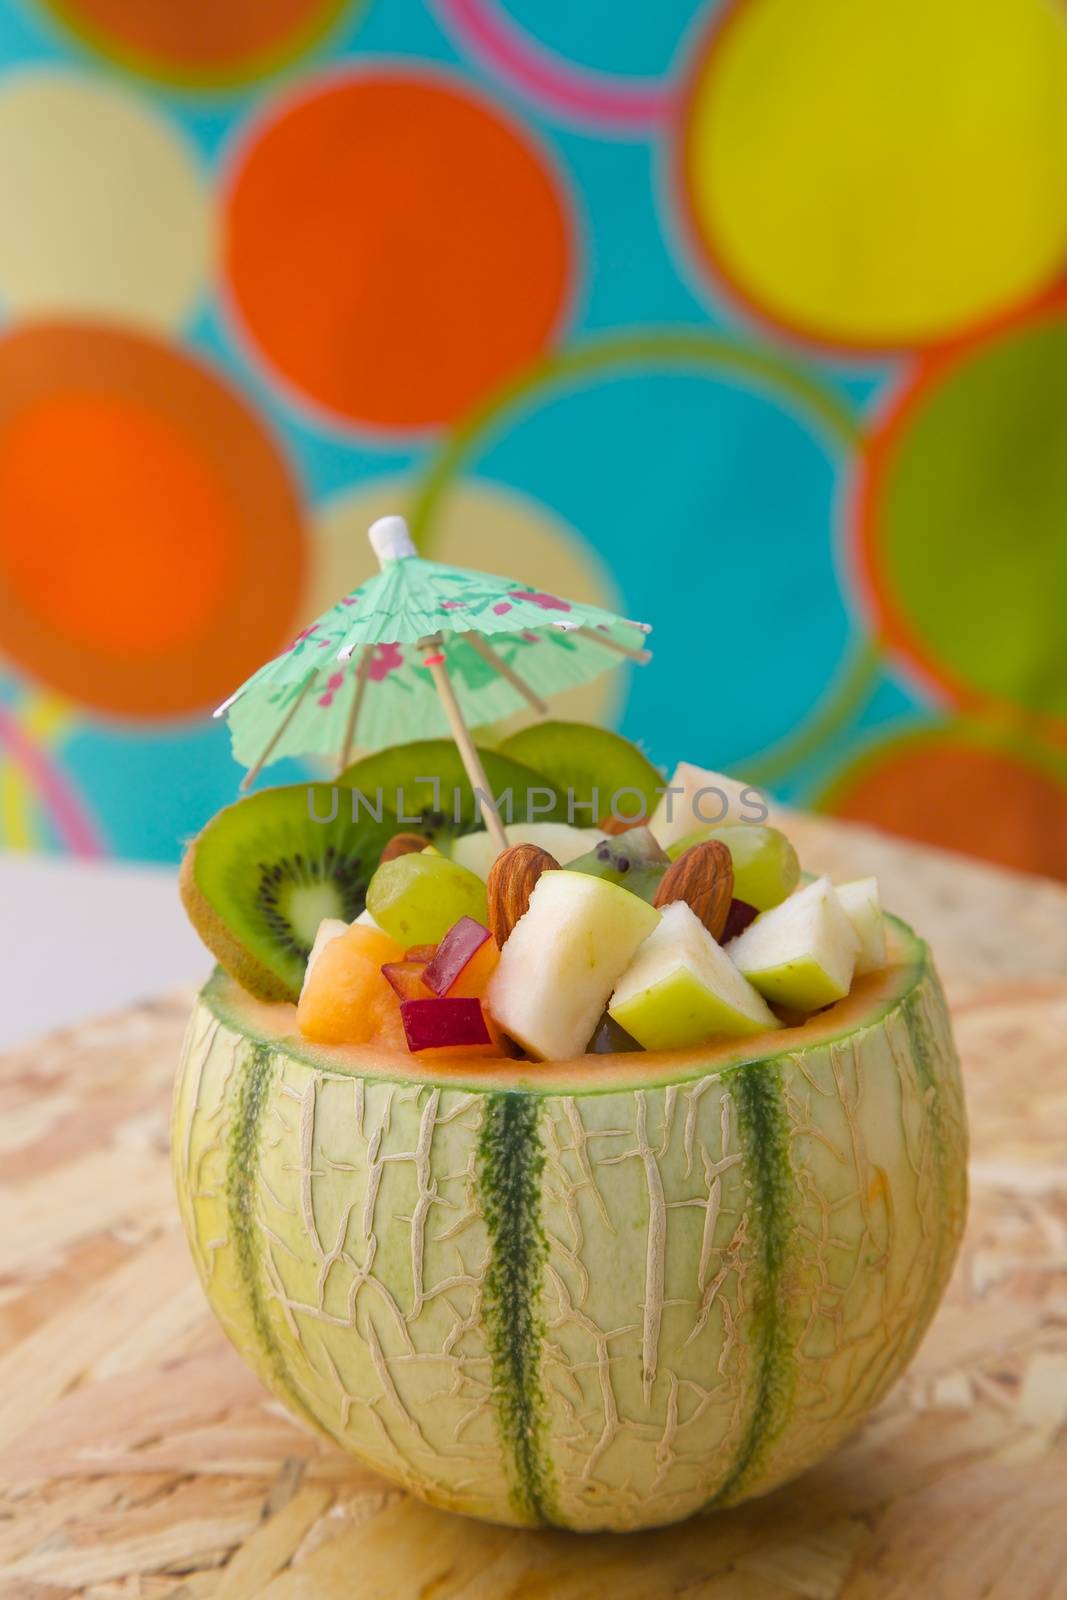 Vitamin dessert - fruit salad in the melon skin by tolikoff_photography